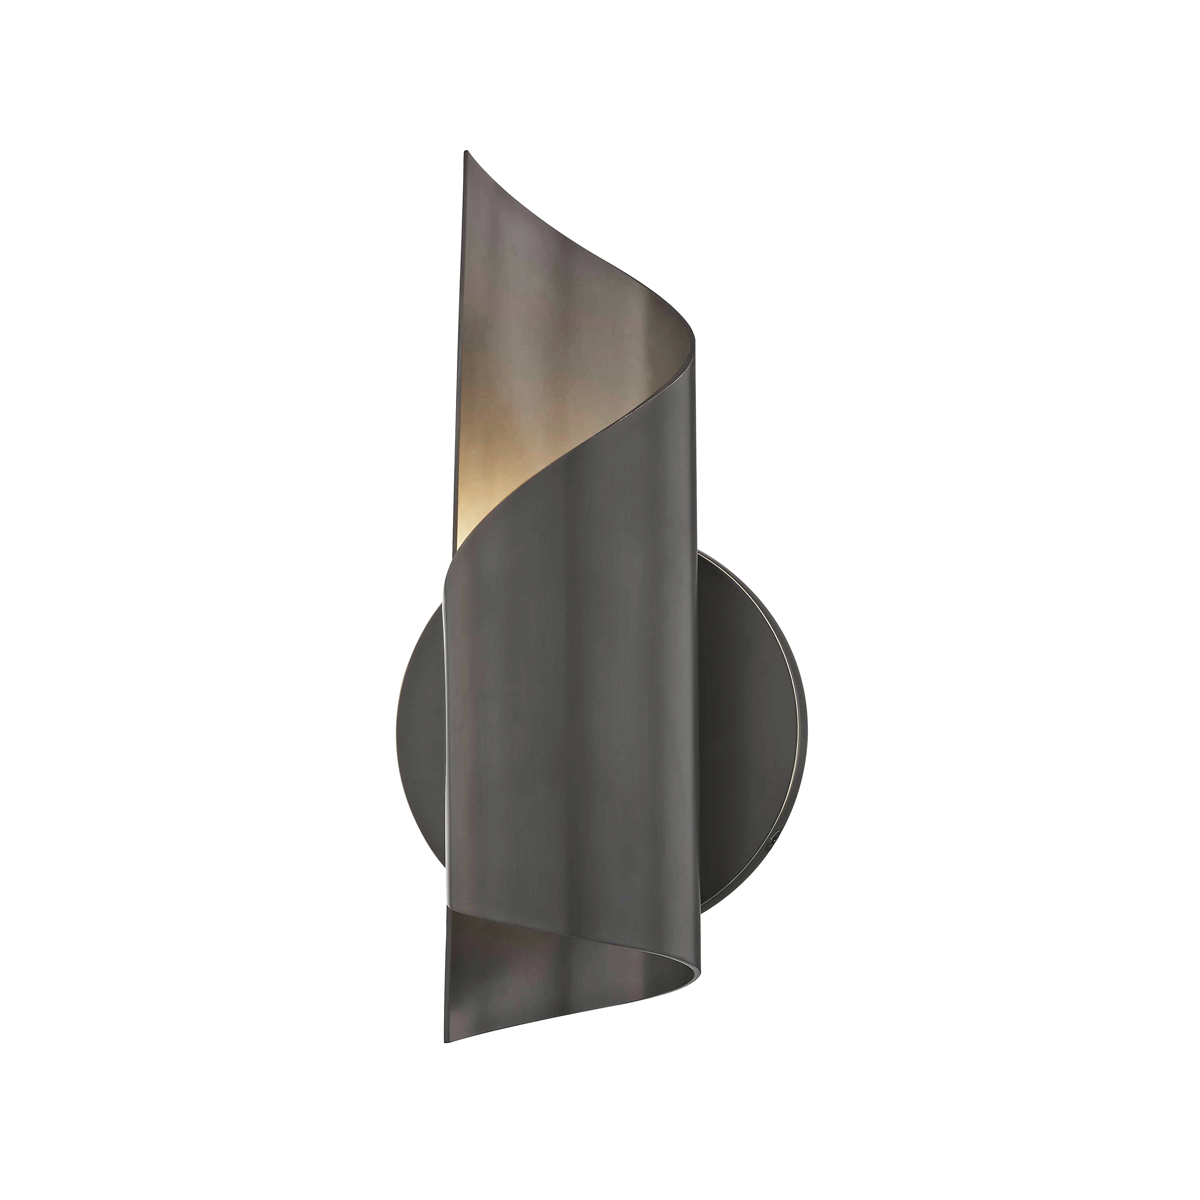 Evie wall sconce